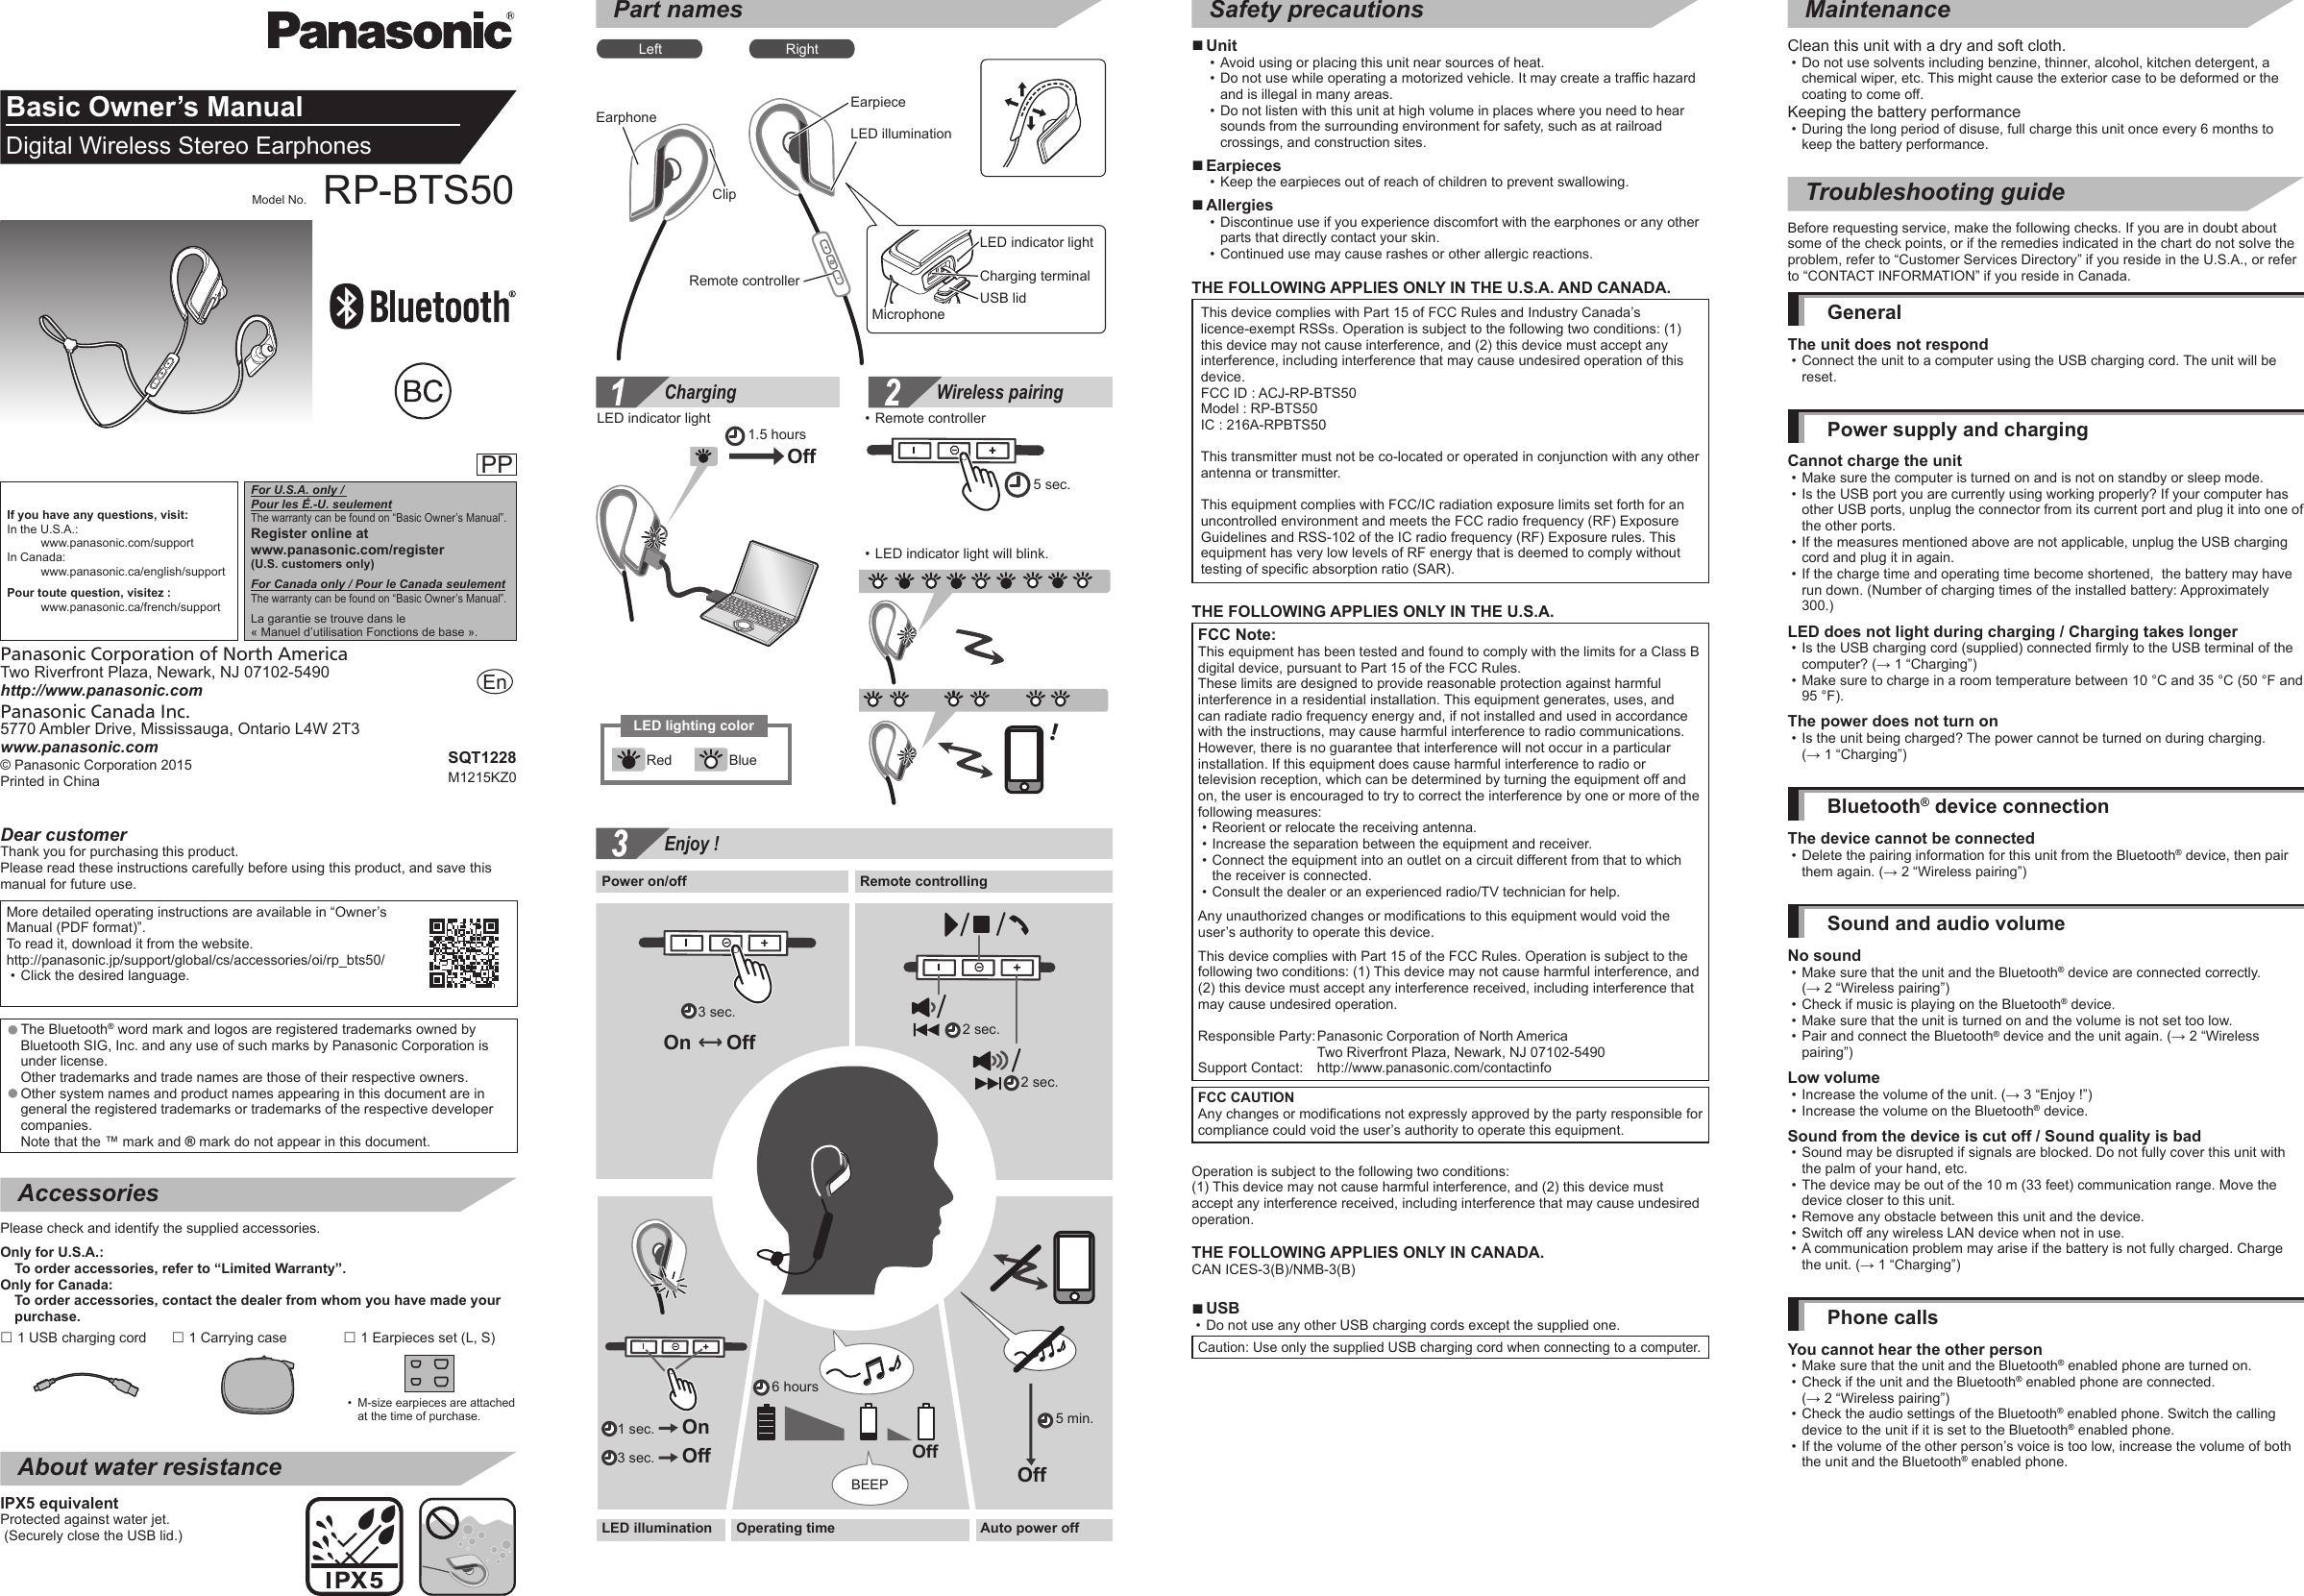 Basic Owner’s ManualDigital Wireless Stereo EarphonesModel No. RP-BTS50PP© Panasonic Corporation 2015 Printed in ChinaPanasonic Canada Inc.5770 Ambler Drive, Mississauga, Ontario L4W 2T3www.panasonic.comPanasonic Corporation of North AmericaTwo Riverfront Plaza, Newark, NJ 07102-5490http://www.panasonic.comSQT1228M1215KZ0EnDear customerThank you for purchasing this product.Please read these instructions carefully before using this product, and save this manual for future use.More detailed operating instructions are available in “Owner’s Manual (PDF format)”. To read it, download it from the website.http://panasonic.jp/support/global/cs/accessories/oi/rp_bts50/ • Click the desired language. ●The Bluetooth® word mark and logos are registered trademarks owned by Bluetooth SIG, Inc. and any use of such marks by Panasonic Corporation is under license. Other trademarks and trade names are those of their respective owners. ●Other system names and product names appearing in this document are in general the registered trademarks or trademarks of the respective developer companies. Note that the ™ mark and ® mark do not appear in this document.AccessoriesPlease check and identify the supplied accessories.Only for U.S.A.: To order accessories, refer to “Limited Warranty”.Only for Canada: To order accessories, contact the dealer from whom you have made your purchase. 1 USB charging cord  1 Carrying case  1 Earpieces set (L, S)  •M-size earpieces are attached at the time of purchase.About water resistanceIPX5 equivalentProtected against water jet. (Securely close the USB lid.)Part namesLeft RightEarphoneRemote controllerEarpieceLED illuminationMicrophoneLED indicator lightCharging terminalUSB lidClipCharging Wireless pairing！1.5 hours5 sec.LED indicator light  • Remote controller • LED indicator light will blink.OffRed BlueLED lighting colorSafety precautions ■Unit • Avoid using or placing this unit near sources of heat. • Do not use while operating a motorized vehicle. It may create a traffic hazard and is illegal in many areas. • Do not listen with this unit at high volume in places where you need to hear sounds from the surrounding environment for safety, such as at railroad crossings, and construction sites. ■Earpieces • Keep the earpieces out of reach of children to prevent swallowing. ■Allergies • Discontinue use if you experience discomfort with the earphones or any other parts that directly contact your skin. • Continued use may cause rashes or other allergic reactions.THE FOLLOWING APPLIES ONLY IN THE U.S.A. AND CANADA.This device complies with Part 15 of FCC Rules and Industry Canada’s  licence-exempt RSSs. Operation is subject to the following two conditions: (1) this device may not cause interference, and (2) this device must accept any interference, including interference that may cause undesired operation of this device.FCC ID : ACJ-RP-BTS50Model : RP-BTS50IC : 216A-RPBTS50This transmitter must not be co-located or operated in conjunction with any other antenna or transmitter.This equipment complies with FCC/IC radiation exposure limits set forth for an uncontrolled environment and meets the FCC radio frequency (RF) Exposure Guidelines and RSS-102 of the IC radio frequency (RF) Exposure rules. This equipment has very low levels of RF energy that is deemed to comply without testing of specific absorption ratio (SAR).THE FOLLOWING APPLIES ONLY IN THE U.S.A.FCC Note:This equipment has been tested and found to comply with the limits for a Class B digital device, pursuant to Part 15 of the FCC Rules. These limits are designed to provide reasonable protection against harmful interference in a residential installation. This equipment generates, uses, and can radiate radio frequency energy and, if not installed and used in accordance with the instructions, may cause harmful interference to radio communications. However, there is no guarantee that interference will not occur in a particular installation. If this equipment does cause harmful interference to radio or television reception, which can be determined by turning the equipment off and on, the user is encouraged to try to correct the interference by one or more of the following measures: • Reorient or relocate the receiving antenna. • Increase the separation between the equipment and receiver. • Connect the equipment into an outlet on a circuit different from that to which the receiver is connected. • Consult the dealer or an experienced radio/TV technician for help.Any unauthorized changes or modifications to this equipment would void the user’s authority to operate this device.This device complies with Part 15 of the FCC Rules. Operation is subject to the following two conditions: (1) This device may not cause harmful interference, and (2) this device must accept any interference received, including interference that may cause undesired operation.Responsible Party:  Panasonic Corporation of North America  Two Riverfront Plaza, Newark, NJ 07102-5490Support Contact:   http://www.panasonic.com/contactinfoFCC CAUTION Any changes or modifications not expressly approved by the party responsible for compliance could void the user’s authority to operate this equipment.Operation is subject to the following two conditions: (1) This device may not cause harmful interference, and (2) this device must accept any interference received, including interference that may cause undesired operation.THE FOLLOWING APPLIES ONLY IN CANADA.CAN ICES-3(B)/NMB-3(B) ■USB • Do not use any other USB charging cords except the supplied one.Caution: Use only the supplied USB charging cord when connecting to a computer.MaintenanceClean this unit with a dry and soft cloth.  • Do not use solvents including benzine, thinner, alcohol, kitchen detergent, a chemical wiper, etc. This might cause the exterior case to be deformed or the coating to come off.Keeping the battery performance • During the long period of disuse, full charge this unit once every 6 months to keep the battery performance.Troubleshooting guideBefore requesting service, make the following checks. If you are in doubt about some of the check points, or if the remedies indicated in the chart do not solve the problem, refer to “Customer Services Directory” if you reside in the U.S.A., or refer to “CONTACT INFORMATION” if you reside in Canada.GeneralThe unit does not respond • Connect the unit to a computer using the USB charging cord. The unit will be reset.Power supply and chargingCannot charge the unit • Make sure the computer is turned on and is not on standby or sleep mode. • Is the USB port you are currently using working properly? If your computer has other USB ports, unplug the connector from its current port and plug it into one of the other ports. • If the measures mentioned above are not applicable, unplug the USB charging cord and plug it in again. • If the charge time and operating time become shortened,  the battery may have run down. (Number of charging times of the installed battery: Approximately 300.)LED does not light during charging / Charging takes longer • Is the USB charging cord (supplied) connected firmly to the USB terminal of the computer? (→ 1 “Charging”) • Make sure to charge in a room temperature between 10 °C and 35 °C (50 °F and 95 °F).The power does not turn on • Is the unit being charged? The power cannot be turned on during charging. (→ 1 “Charging”)Bluetooth® device connectionThe device cannot be connected • Delete the pairing information for this unit from the Bluetooth® device, then pair them again. (→ 2 “Wireless pairing”)Sound and audio volumeNo sound • Make sure that the unit and the Bluetooth® device are connected correctly.  (→ 2 “Wireless pairing”) • Check if music is playing on the Bluetooth® device. • Make sure that the unit is turned on and the volume is not set too low. • Pair and connect the Bluetooth® device and the unit again. (→ 2 “Wireless pairing”)Low volume • Increase the volume of the unit. (→ 3 “Enjoy !”) • Increase the volume on the Bluetooth® device.Sound from the device is cut off / Sound quality is bad • Sound may be disrupted if signals are blocked. Do not fully cover this unit with the palm of your hand, etc. • The device may be out of the 10 m (33 feet) communication range. Move the device closer to this unit. • Remove any obstacle between this unit and the device. • Switch off any wireless LAN device when not in use. • A communication problem may arise if the battery is not fully charged. Charge the unit. (→ 1 “Charging”)Phone callsYou cannot hear the other person • Make sure that the unit and the Bluetooth® enabled phone are turned on. • Check if the unit and the Bluetooth® enabled phone are connected. (→ 2 “Wireless pairing”) • Check the audio settings of the Bluetooth® enabled phone. Switch the calling device to the unit if it is set to the Bluetooth® enabled phone. • If the volume of the other person’s voice is too low, increase the volume of both the unit and the Bluetooth® enabled phone.Enjoy !♫♪♫♪6 hoursPower on/off Remote controllingLED illumination Auto power offBEEP5 min.3 sec.OffOffOn OffOperating time1 sec.   On3 sec.   Off2 sec.2 sec.If you have any questions, visit:In the U.S.A.:    www.panasonic.com/supportIn Canada:    www.panasonic.ca/english/supportPour toute question, visitez :    www.panasonic.ca/french/supportFor U.S.A. only /  Pour les É.-U. seulementThe warranty can be found on “Basic Owner’s Manual”.Register online atwww.panasonic.com/register (U.S. customers only)For Canada only / Pour le Canada seulementThe warranty can be found on “Basic Owner’s Manual”.La garantie se trouve dans le  « Manuel d’utilisation Fonctions de base ».